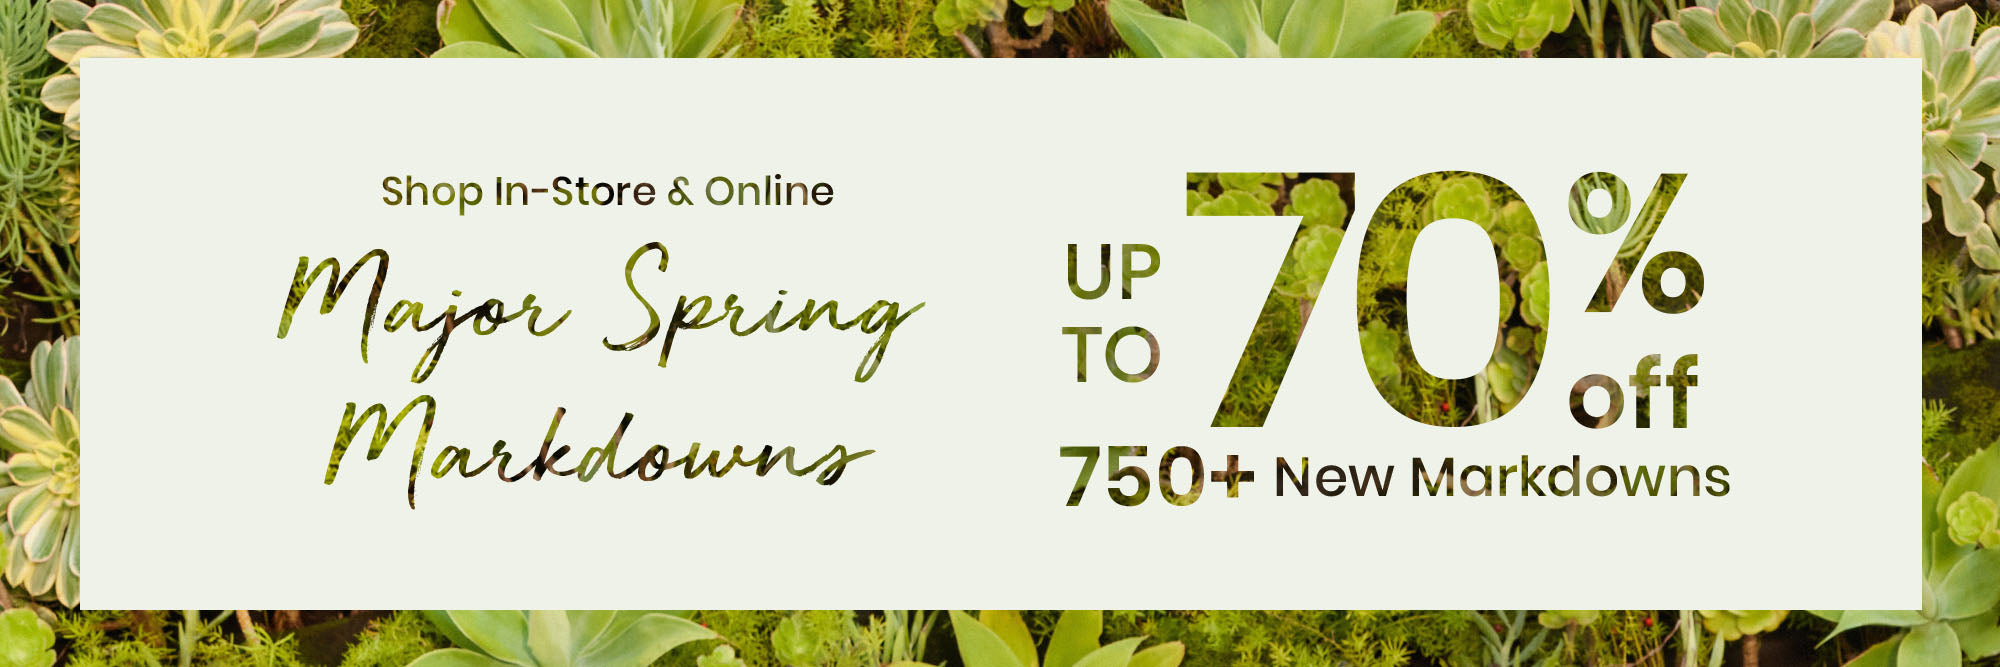 Get up to 70% off on women's clothing for major spring savings including over 750 new markdowns in casual or formal dresses, jeans, skirts, women's tops, heels, & everything you need to create spring outfits affordably!